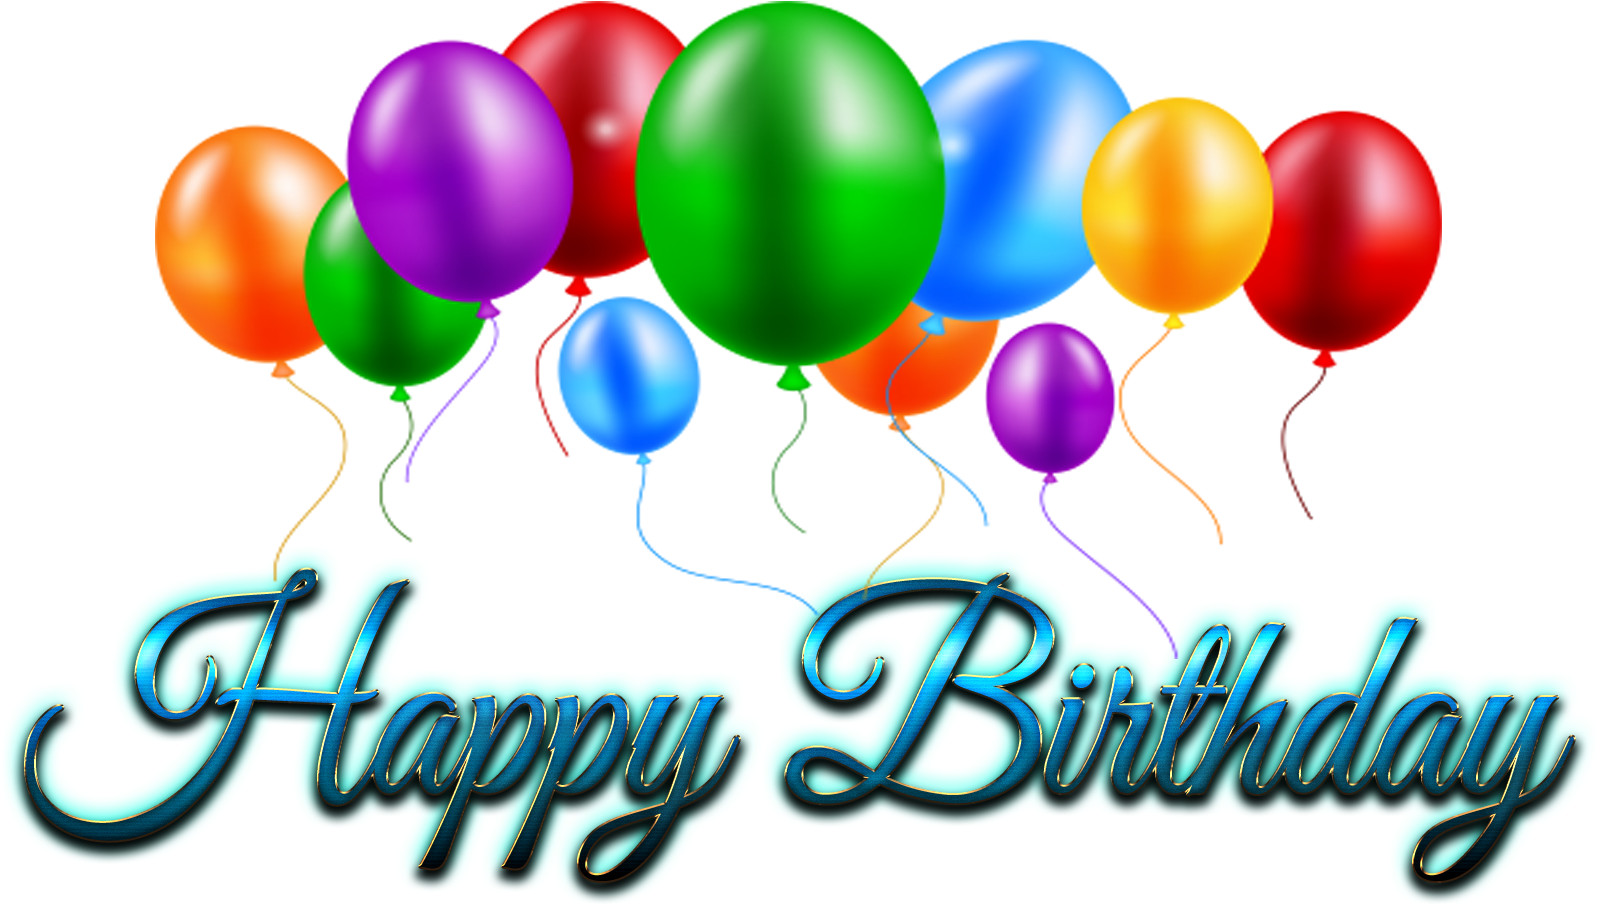 Happy birthday jack name lettering Royalty Free Vector Image